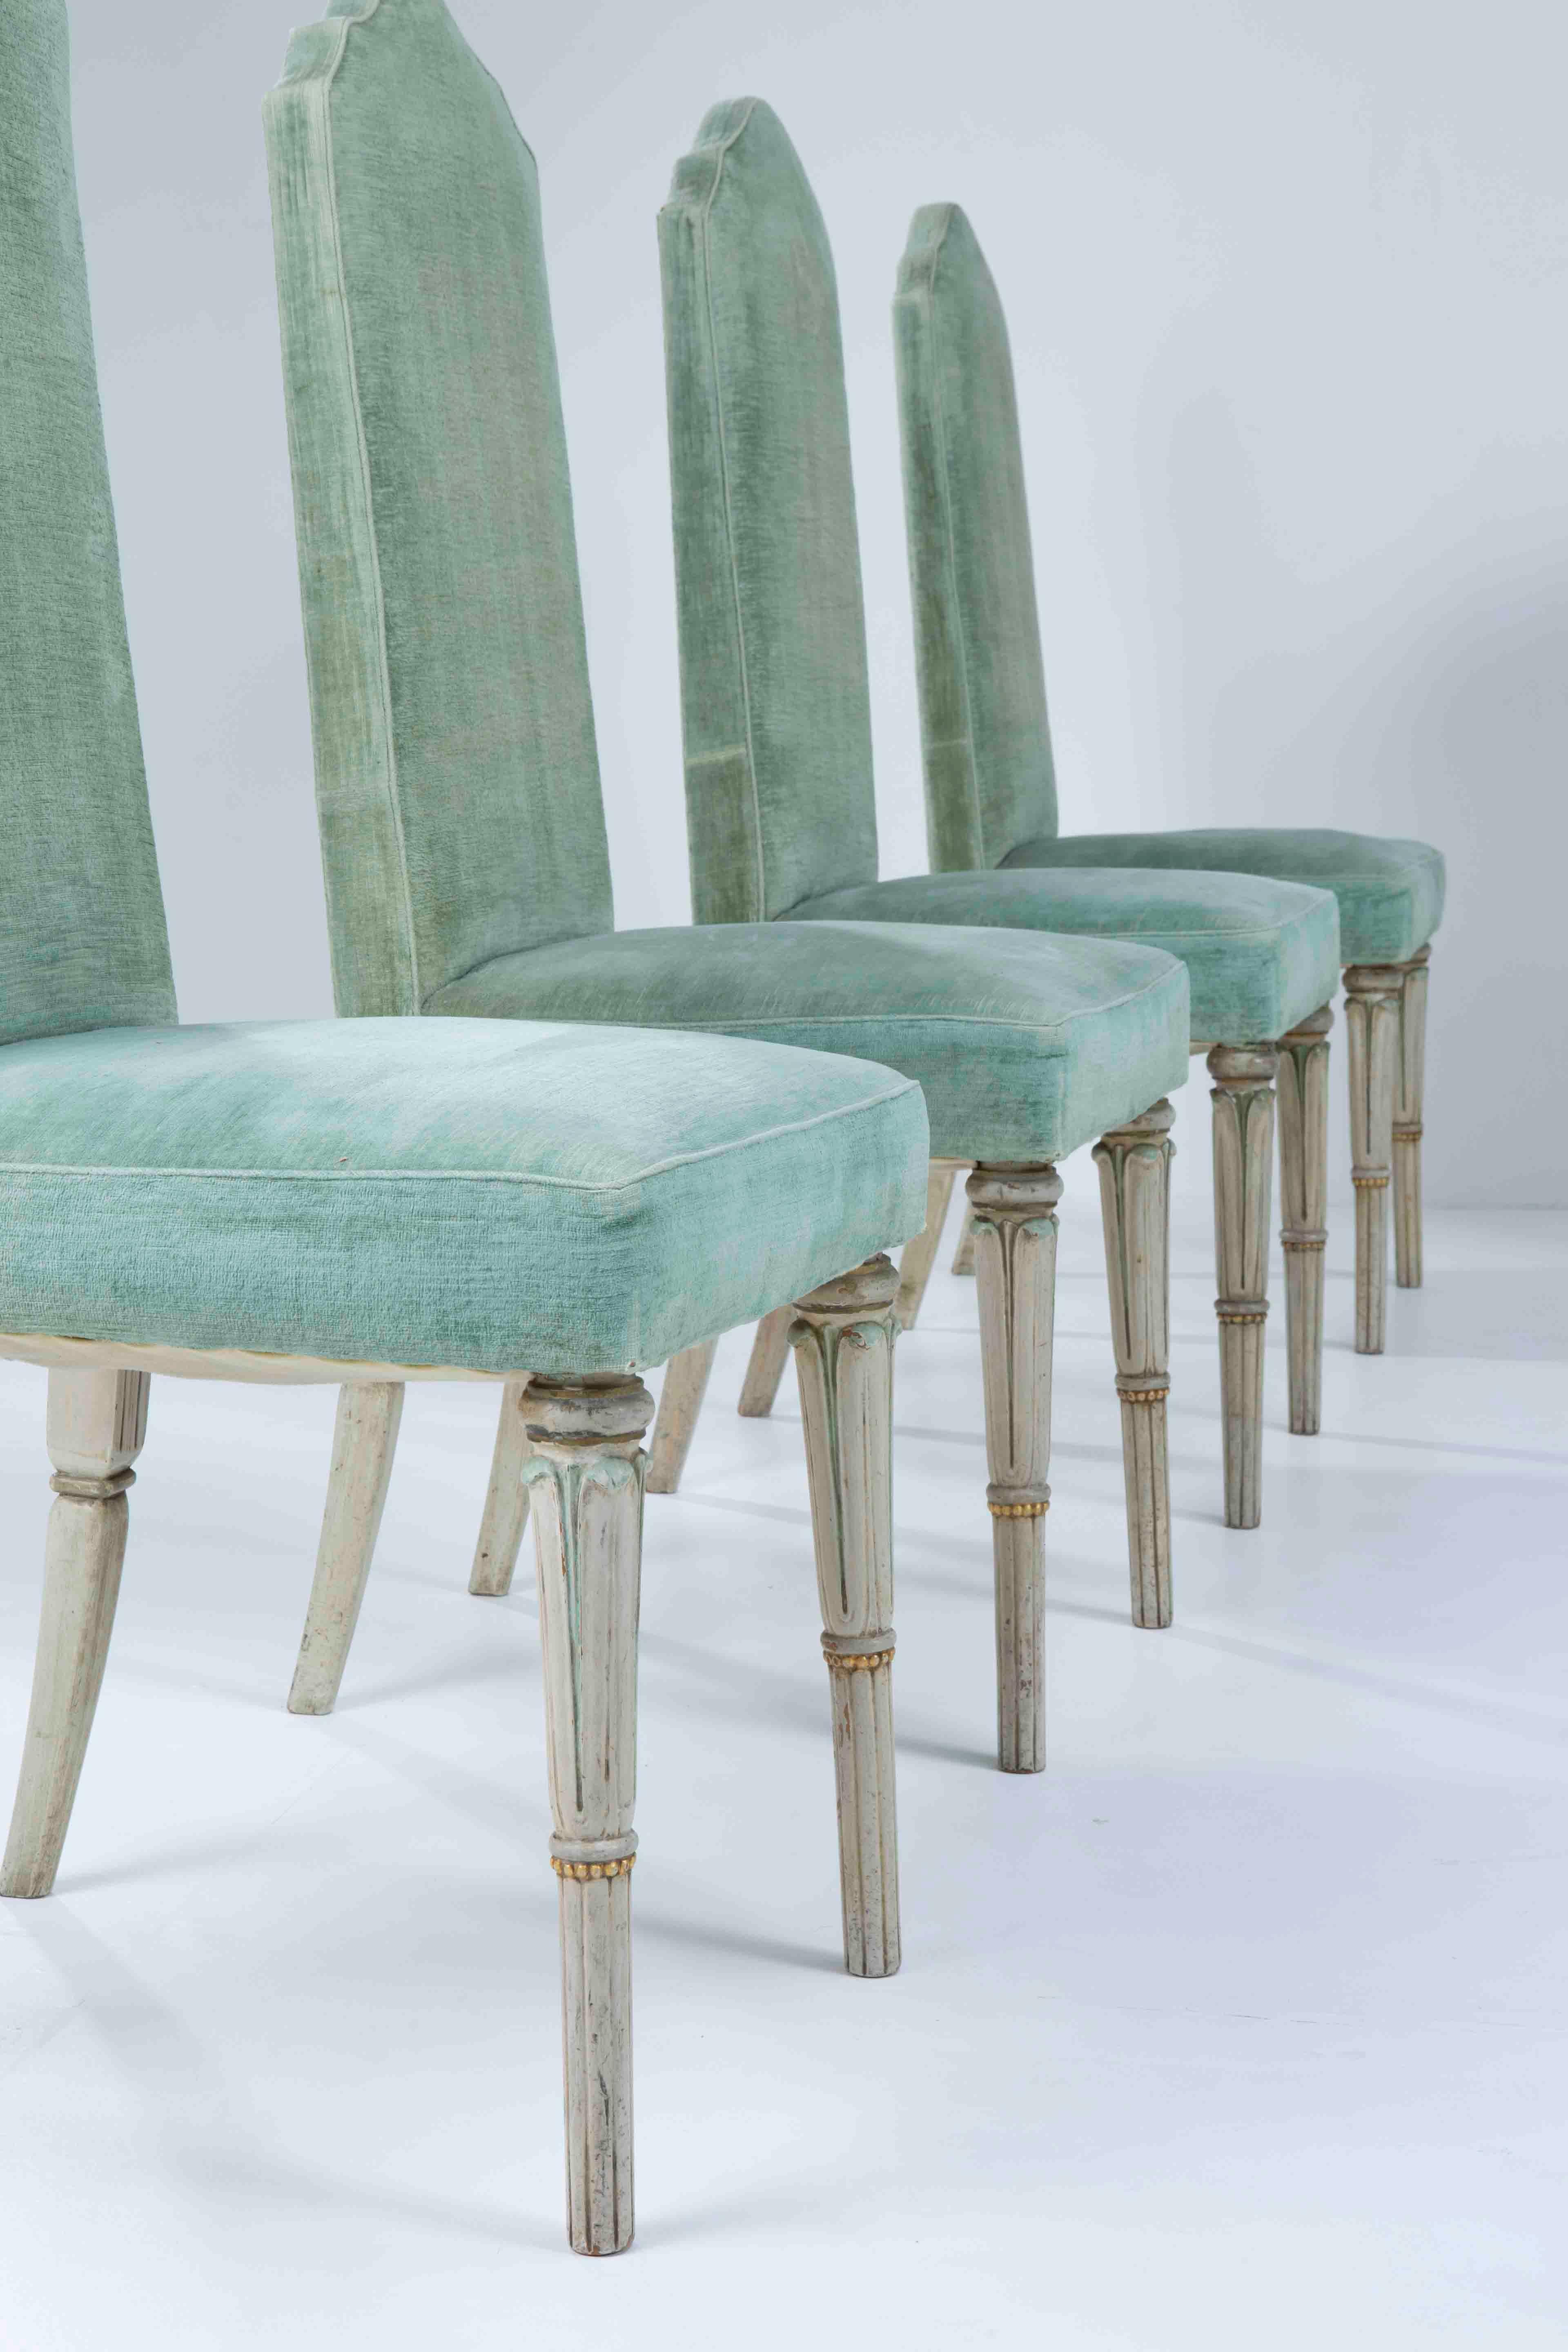 Tomaso Buzzi Set of eight chairs - 1954 Italian Design from a private commission In Fair Condition For Sale In Milan, IT